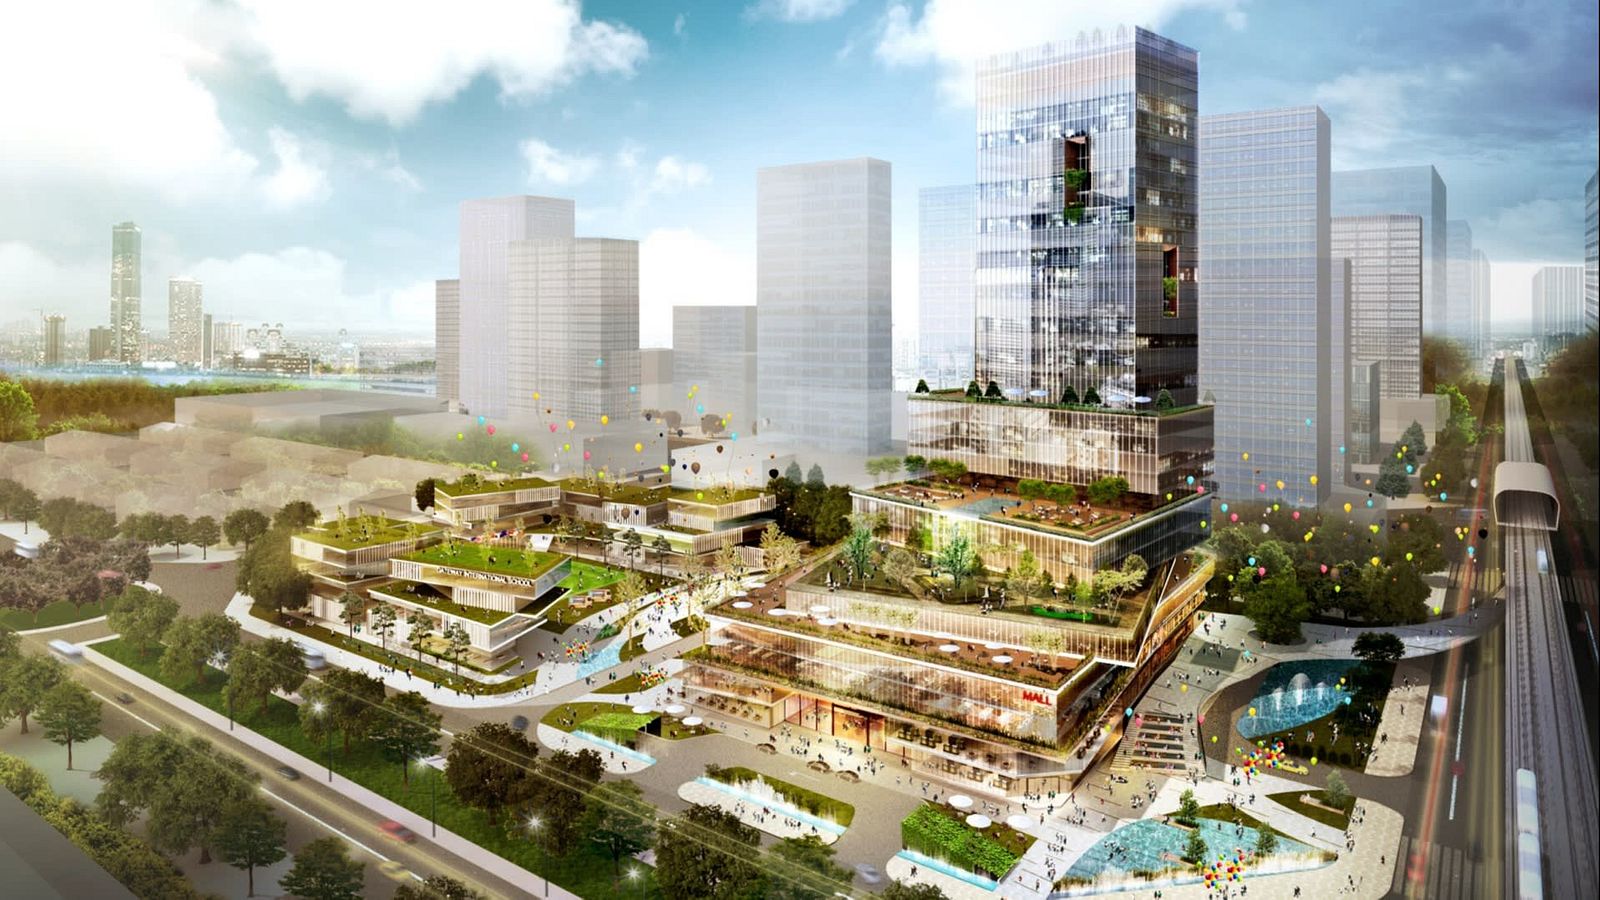 Japanese Retail Giant Takashimaya Announces New Real Estate Project in ...